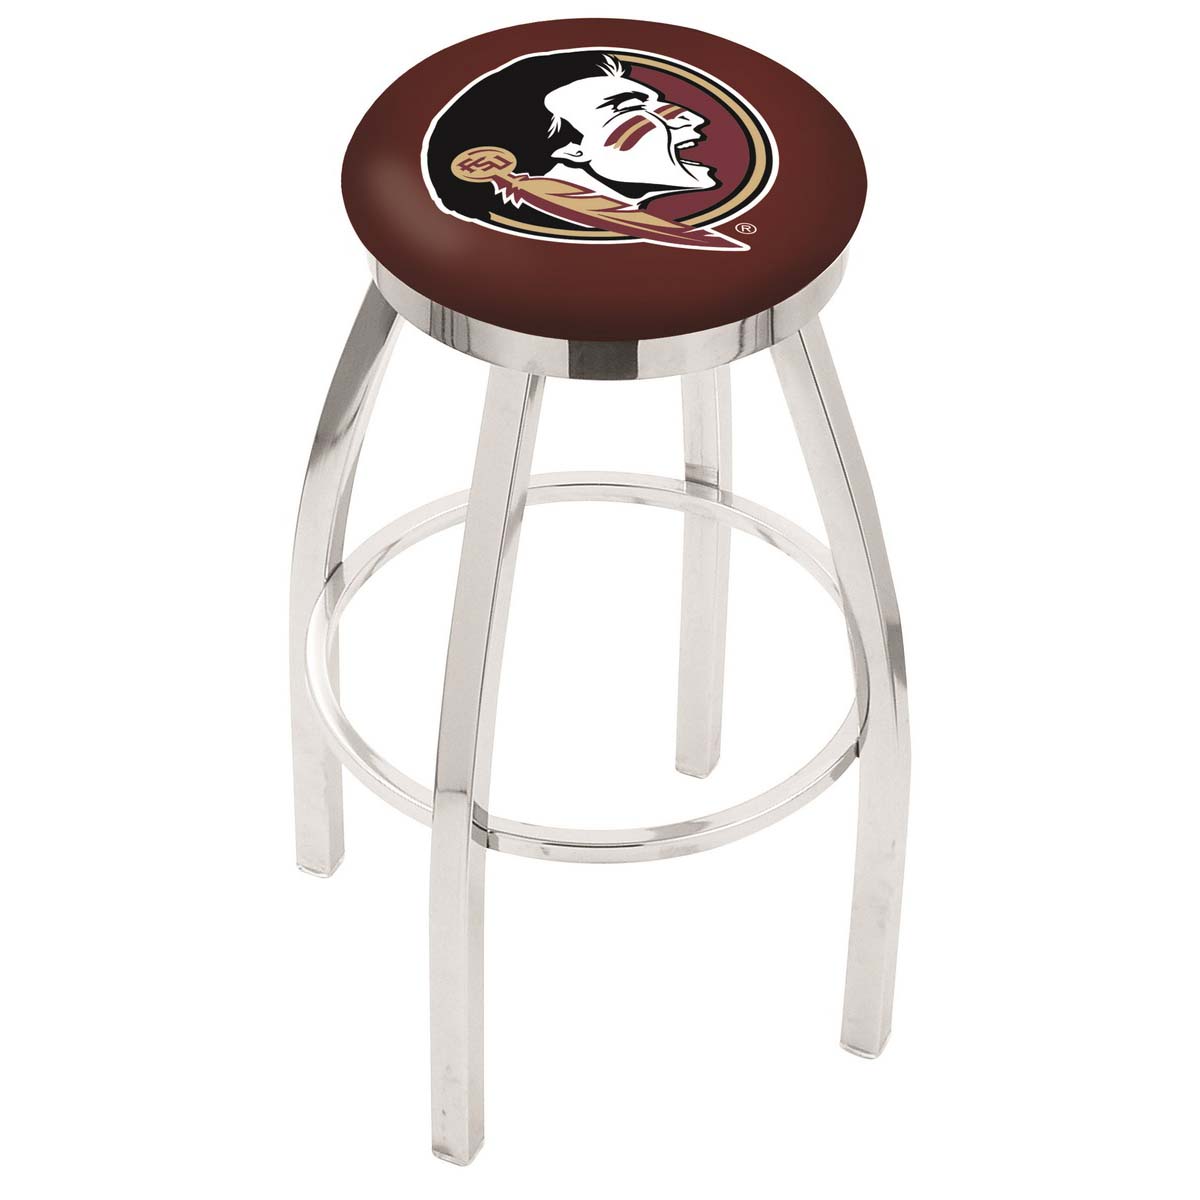 30 Inch Chrome Florida State Head Swivel Counter Stool W/ Accent Ring